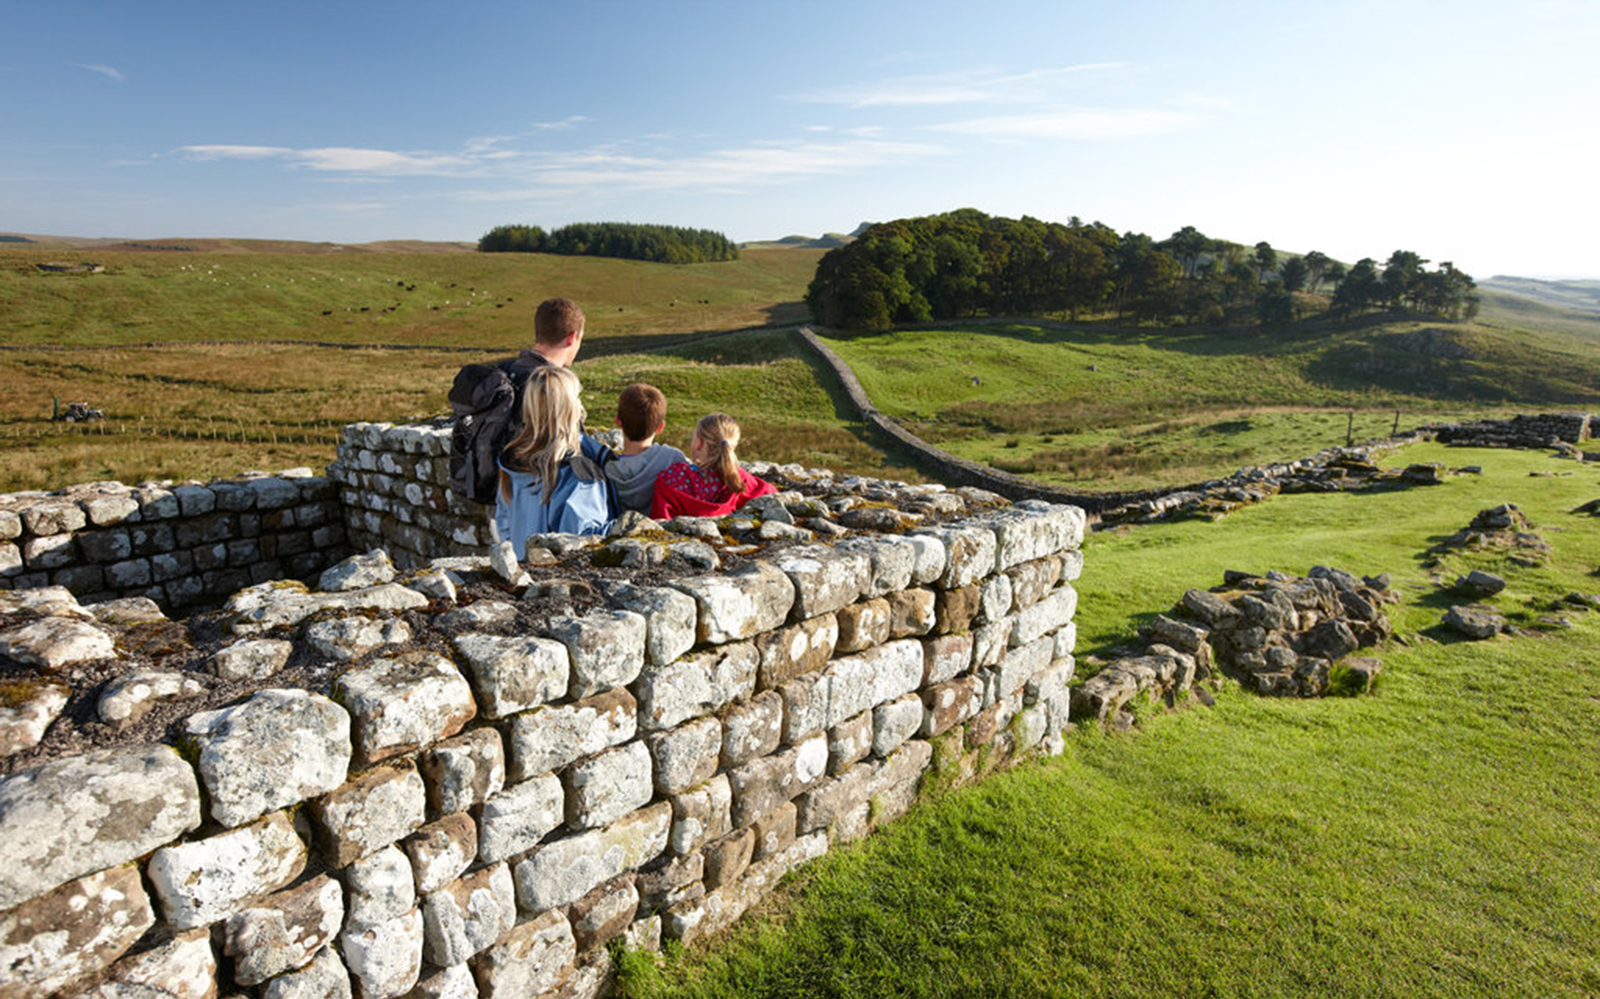 Image of Entry Tickets to Housesteads Roman Fort